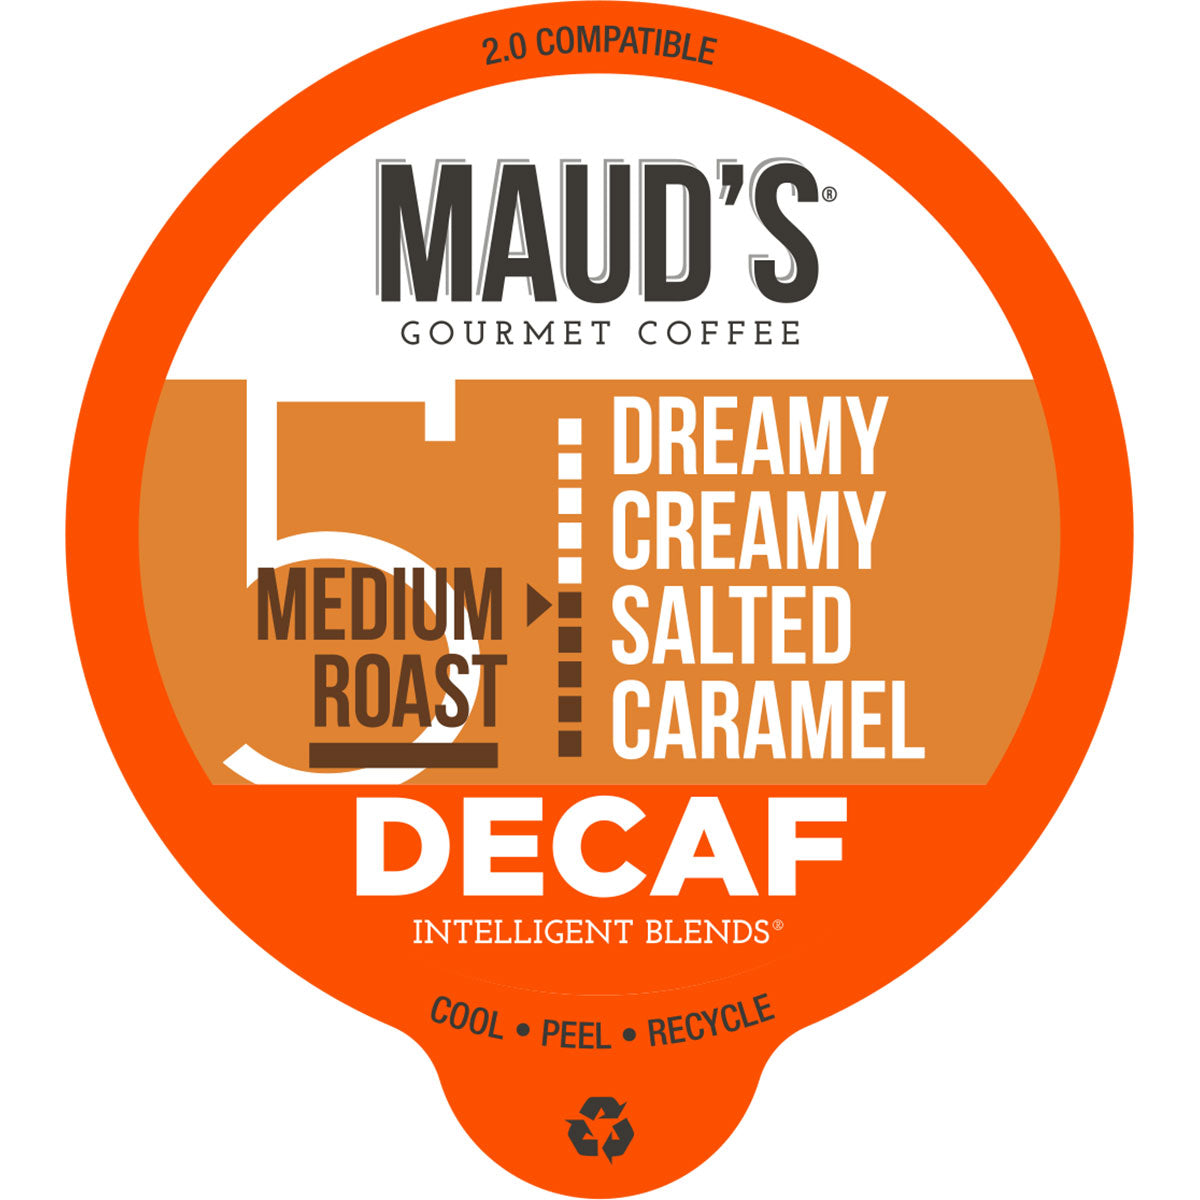 Maud's Decaf Salted Caramel Flavored Coffee Pods (Dreamy Creamy Salted Caramel)